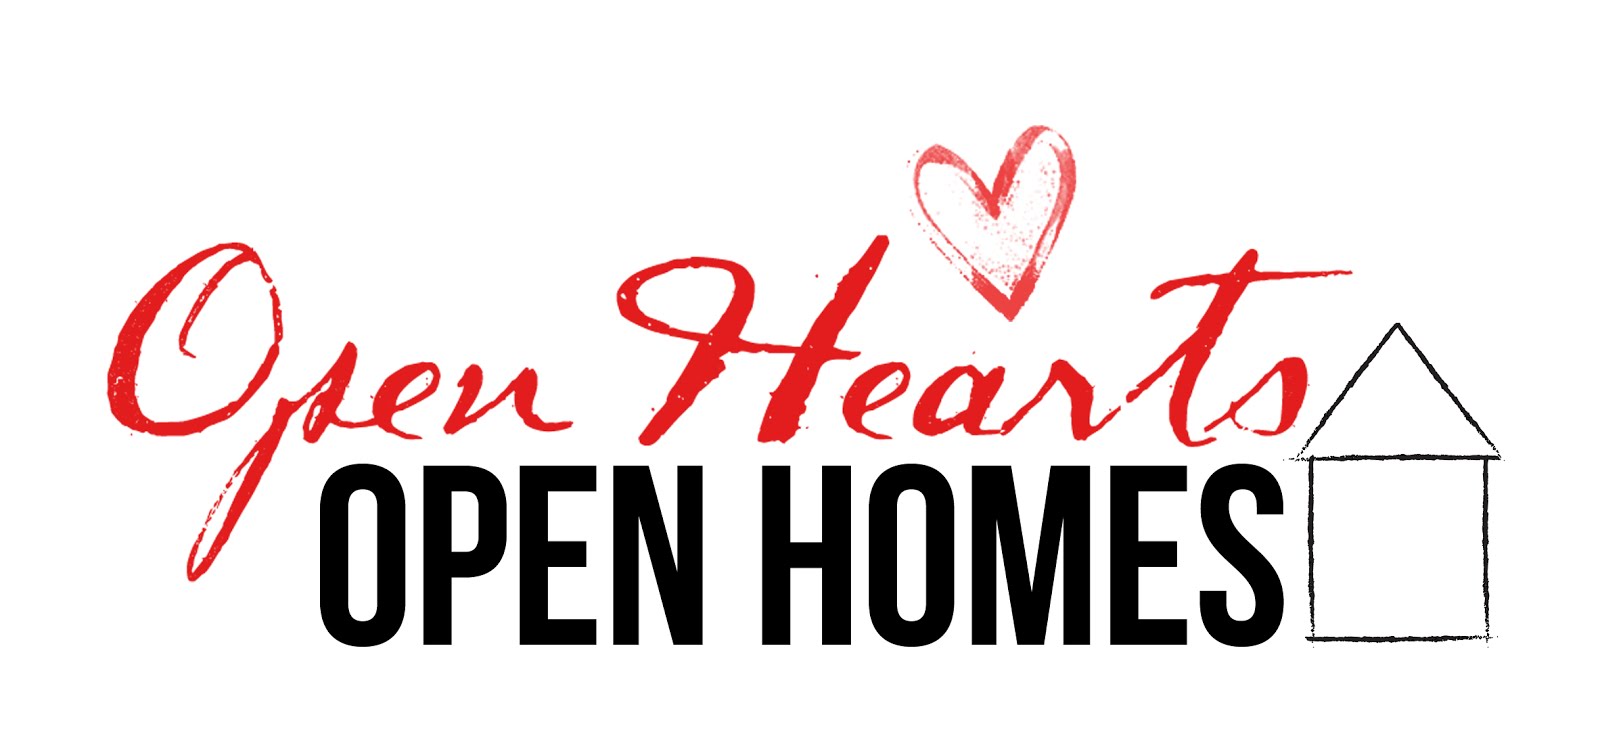 Open Hearts Open Homes Ministry